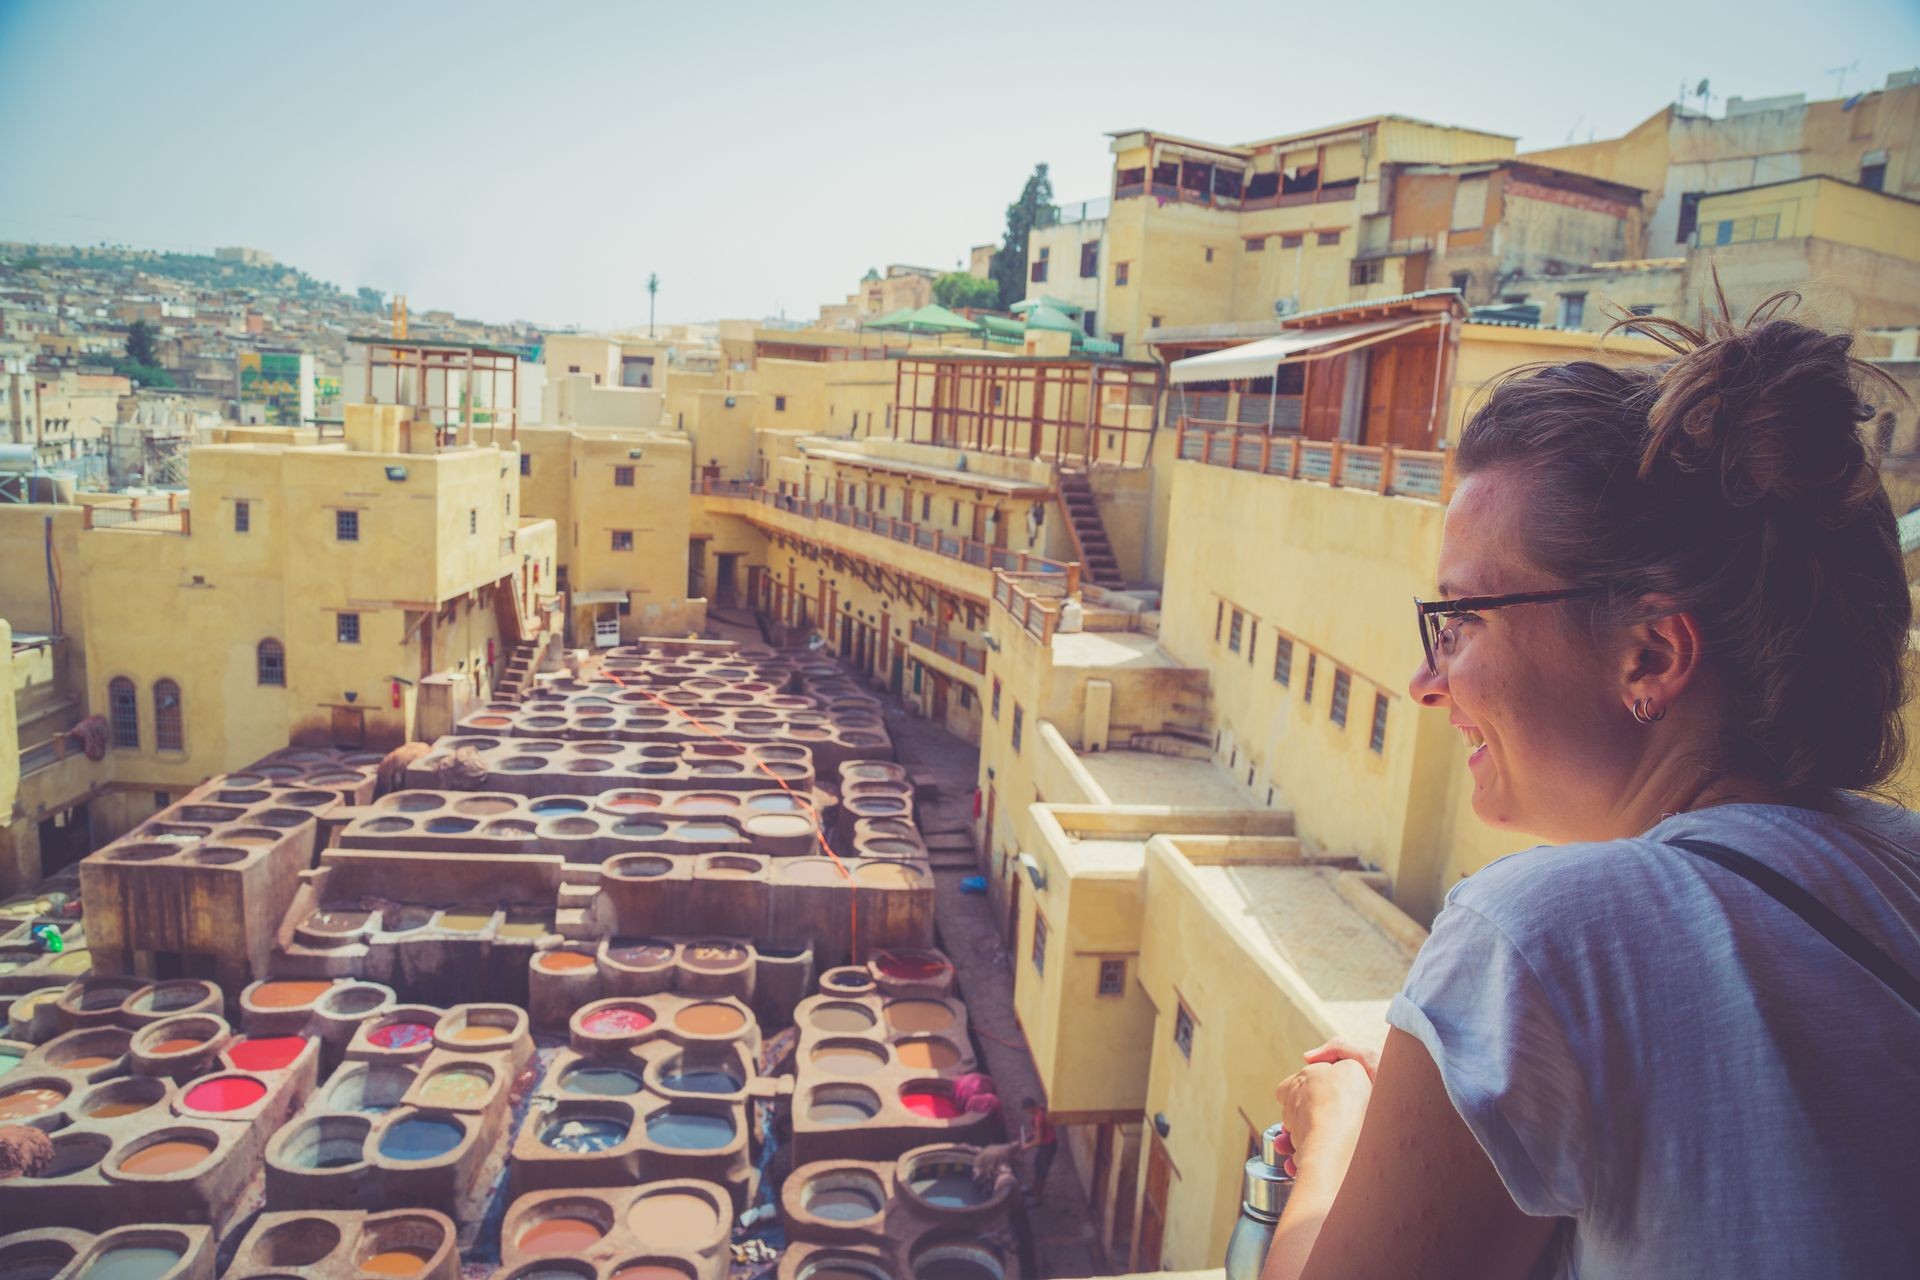 Tourist girl is watching the Tannery in the middle of souk of Fez, traditional leather tannery from the 11th century is now biggest tourist attraction in Fes.